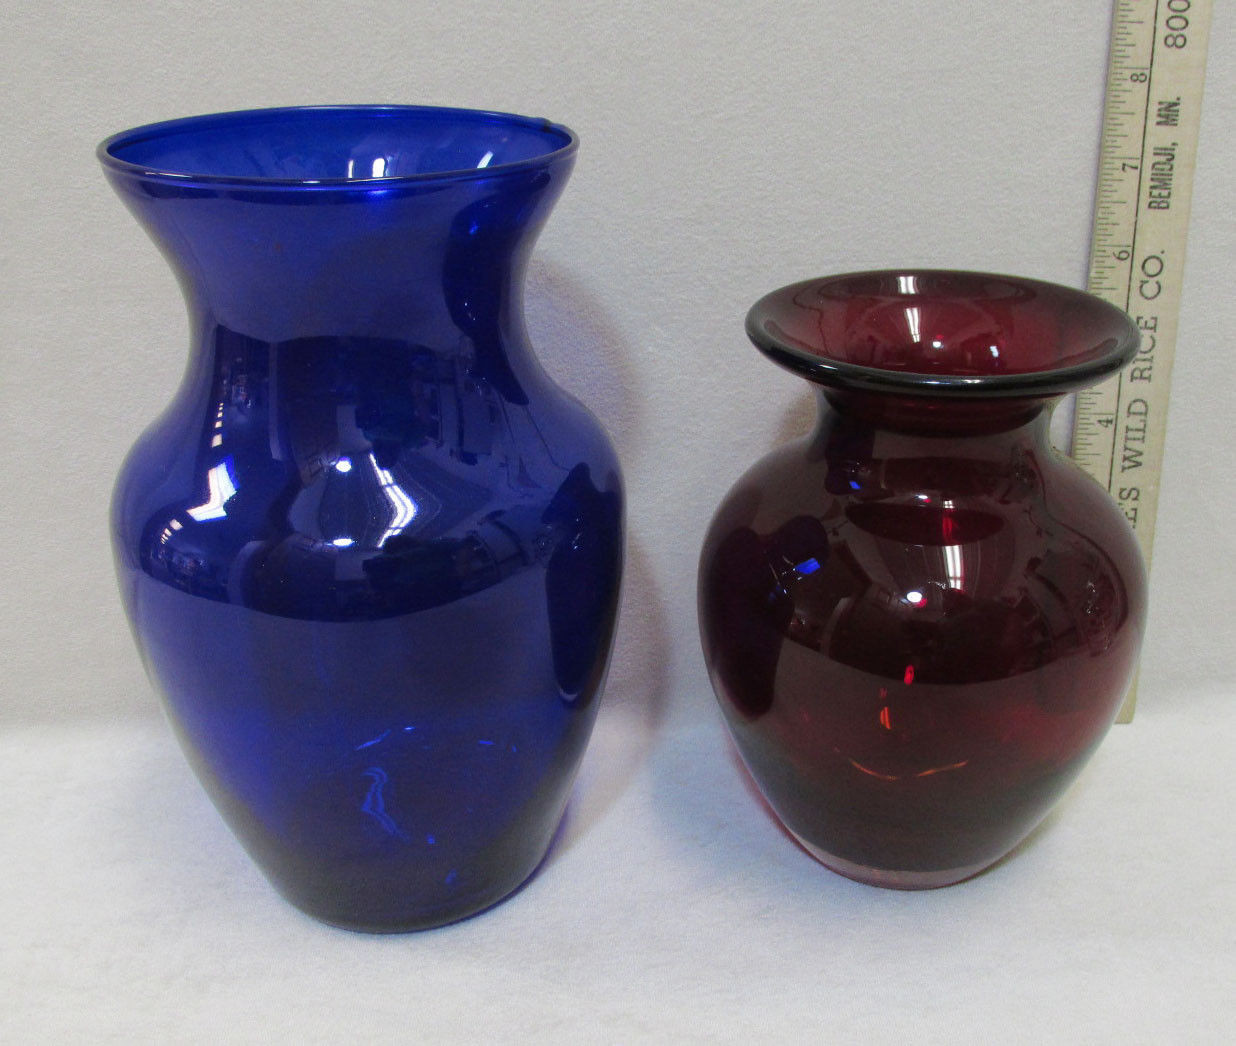 15 Recommended Fenton Blue Vase 2024 free download fenton blue vase of clear blue vase photos lot 3 red clear blue glass vases patriotic regarding clear blue vase photos lot 3 red clear blue glass vases patriotic and 49 similar items